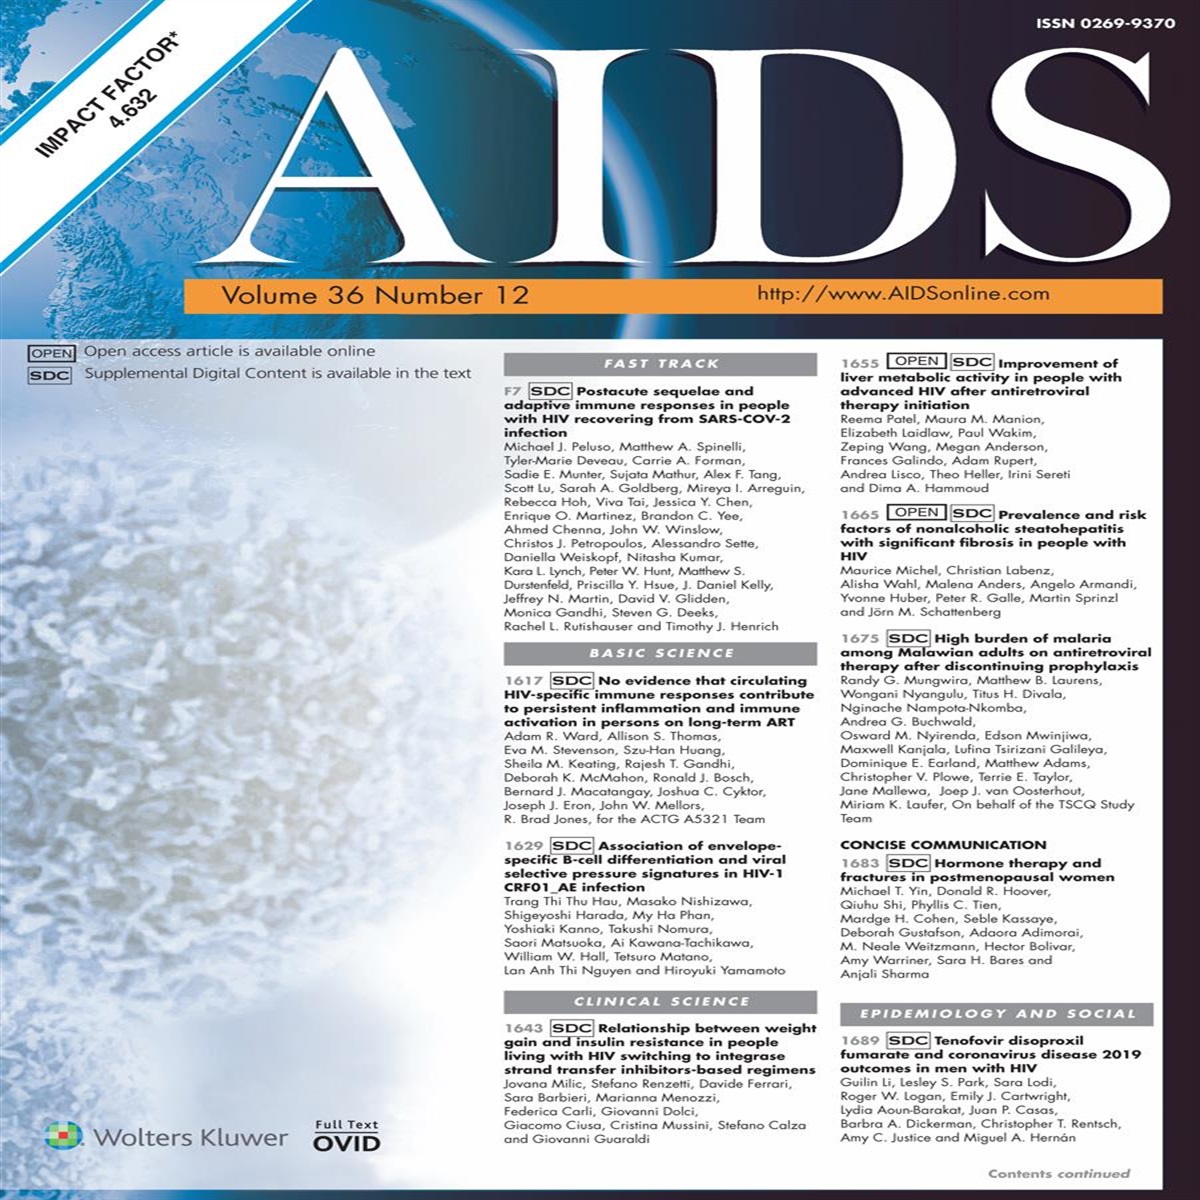 Surrogate neutralization responses following SARS-CoV-2 vaccination in people with HIV